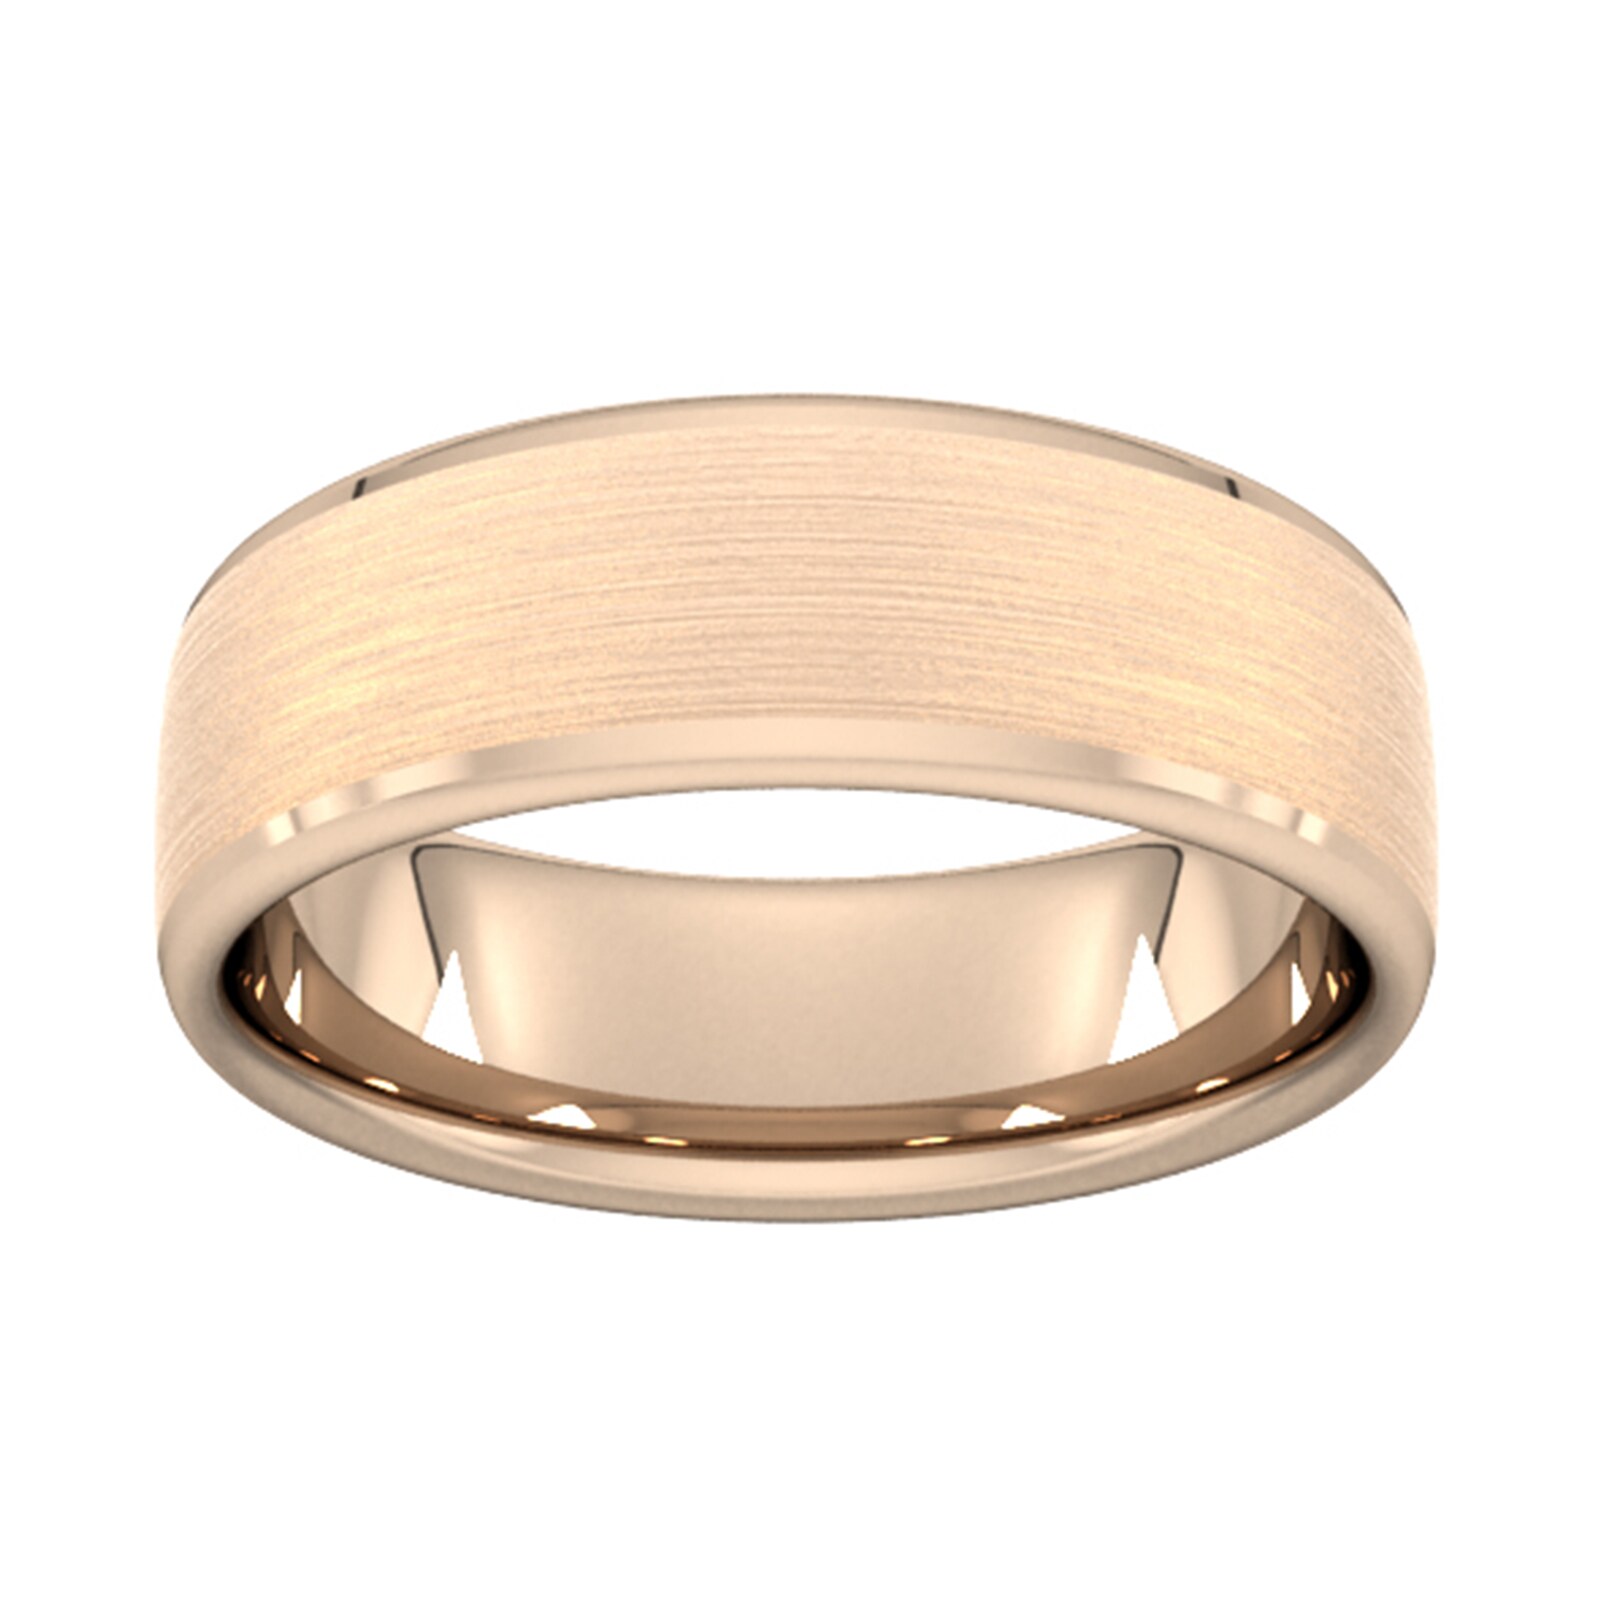 7mm Flat Court Heavy Polished Chamfered Edges With Matt Centre Wedding Ring In 18 Carat Rose Gold - Ring Size I